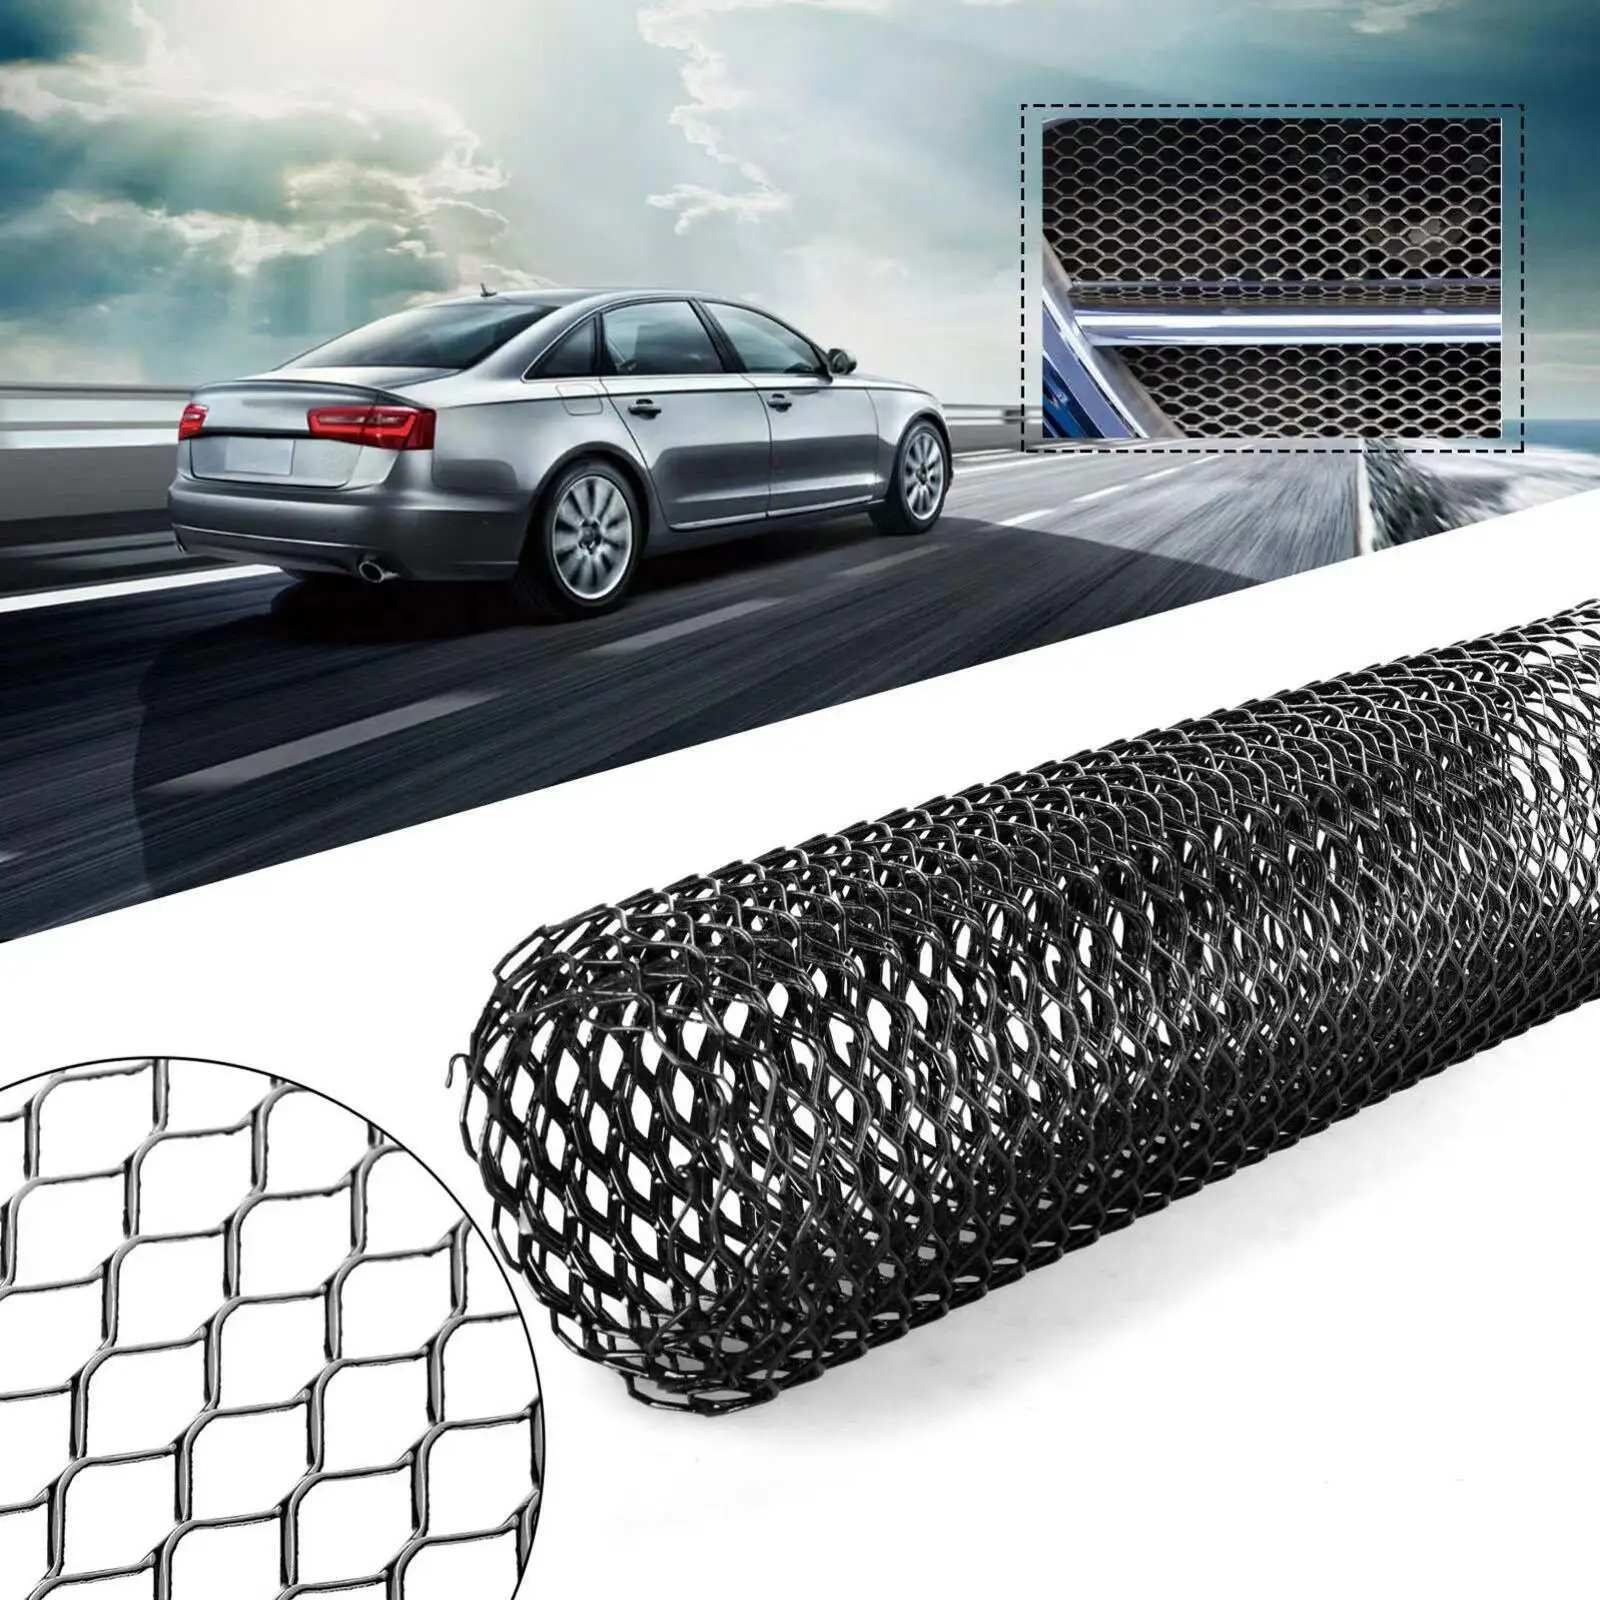 Grille Mesh Net Sheet 40x13inch Replace Multifunctional GM Fit for Car